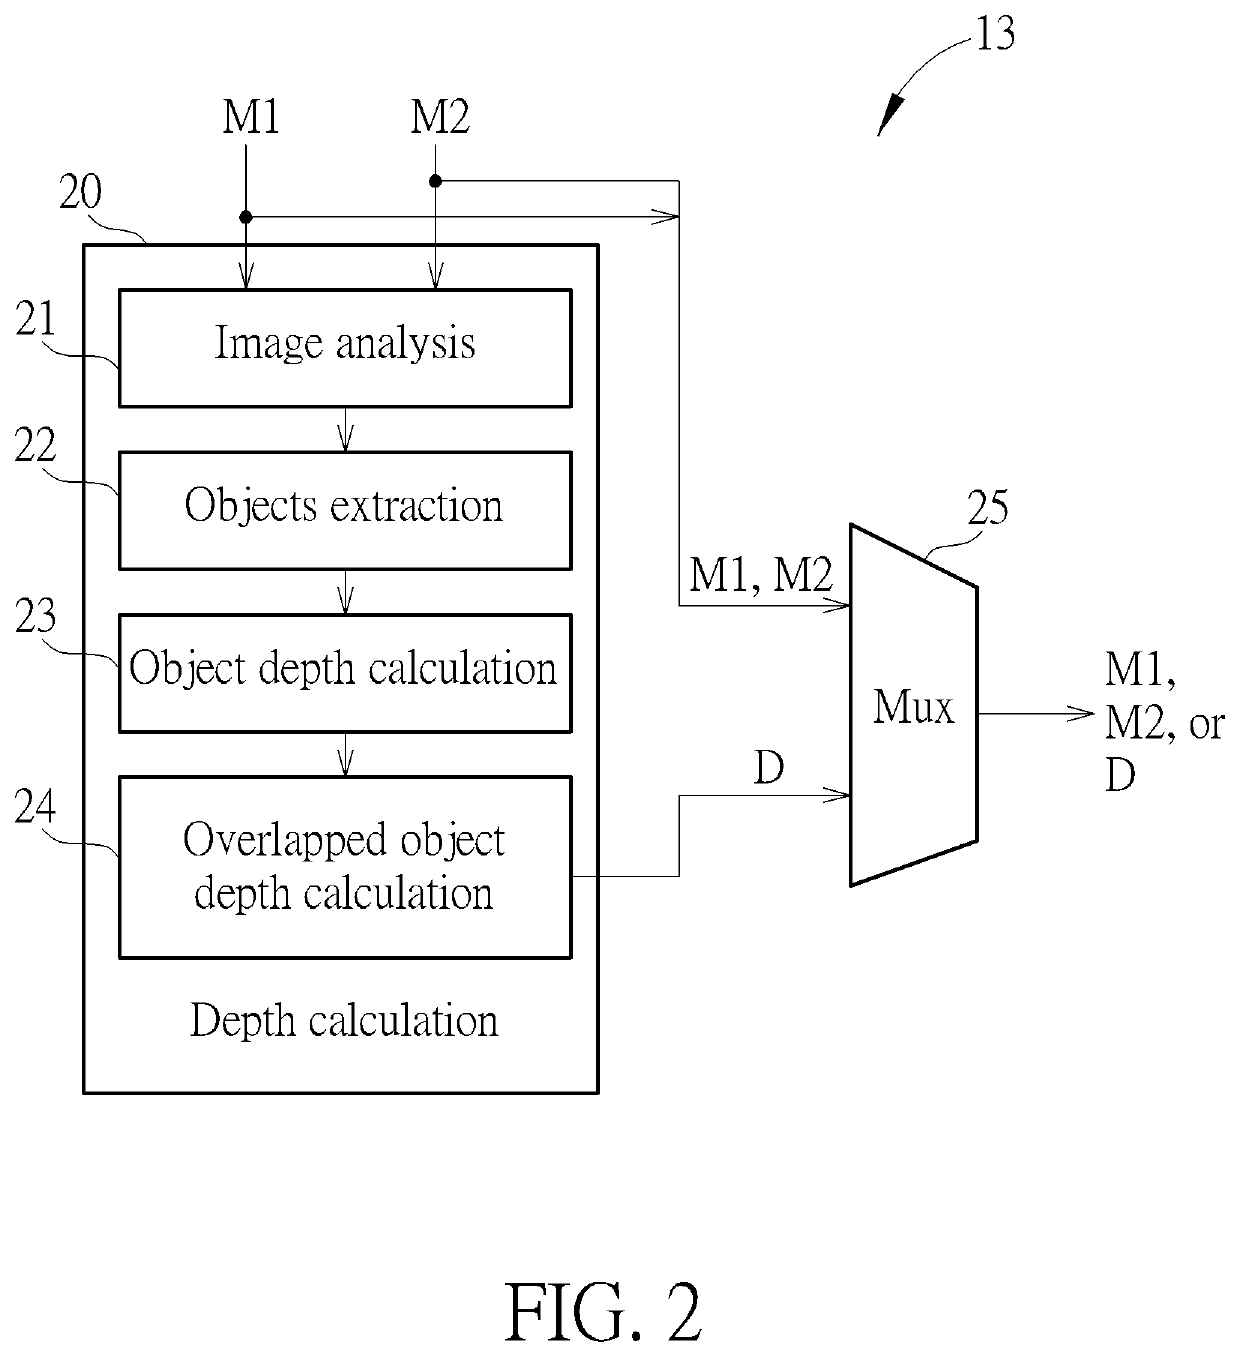 Interactive image processing system using infrared cameras